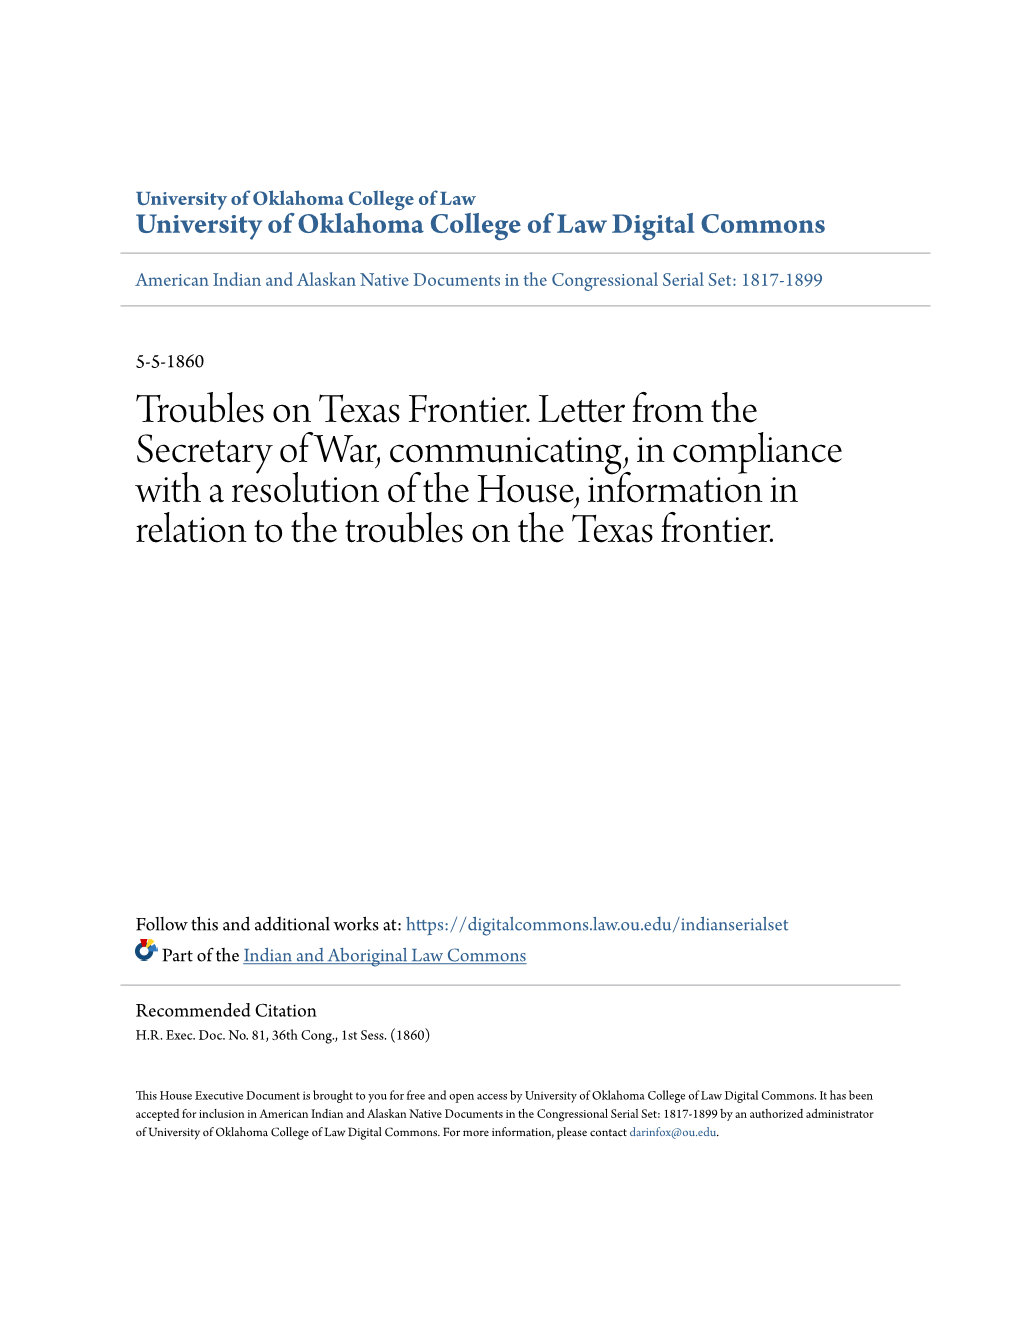 Troubles on Texas Frontier. Letter from the Secretary of War, Communicating, in Compliance with a Resolution of the House, Infor